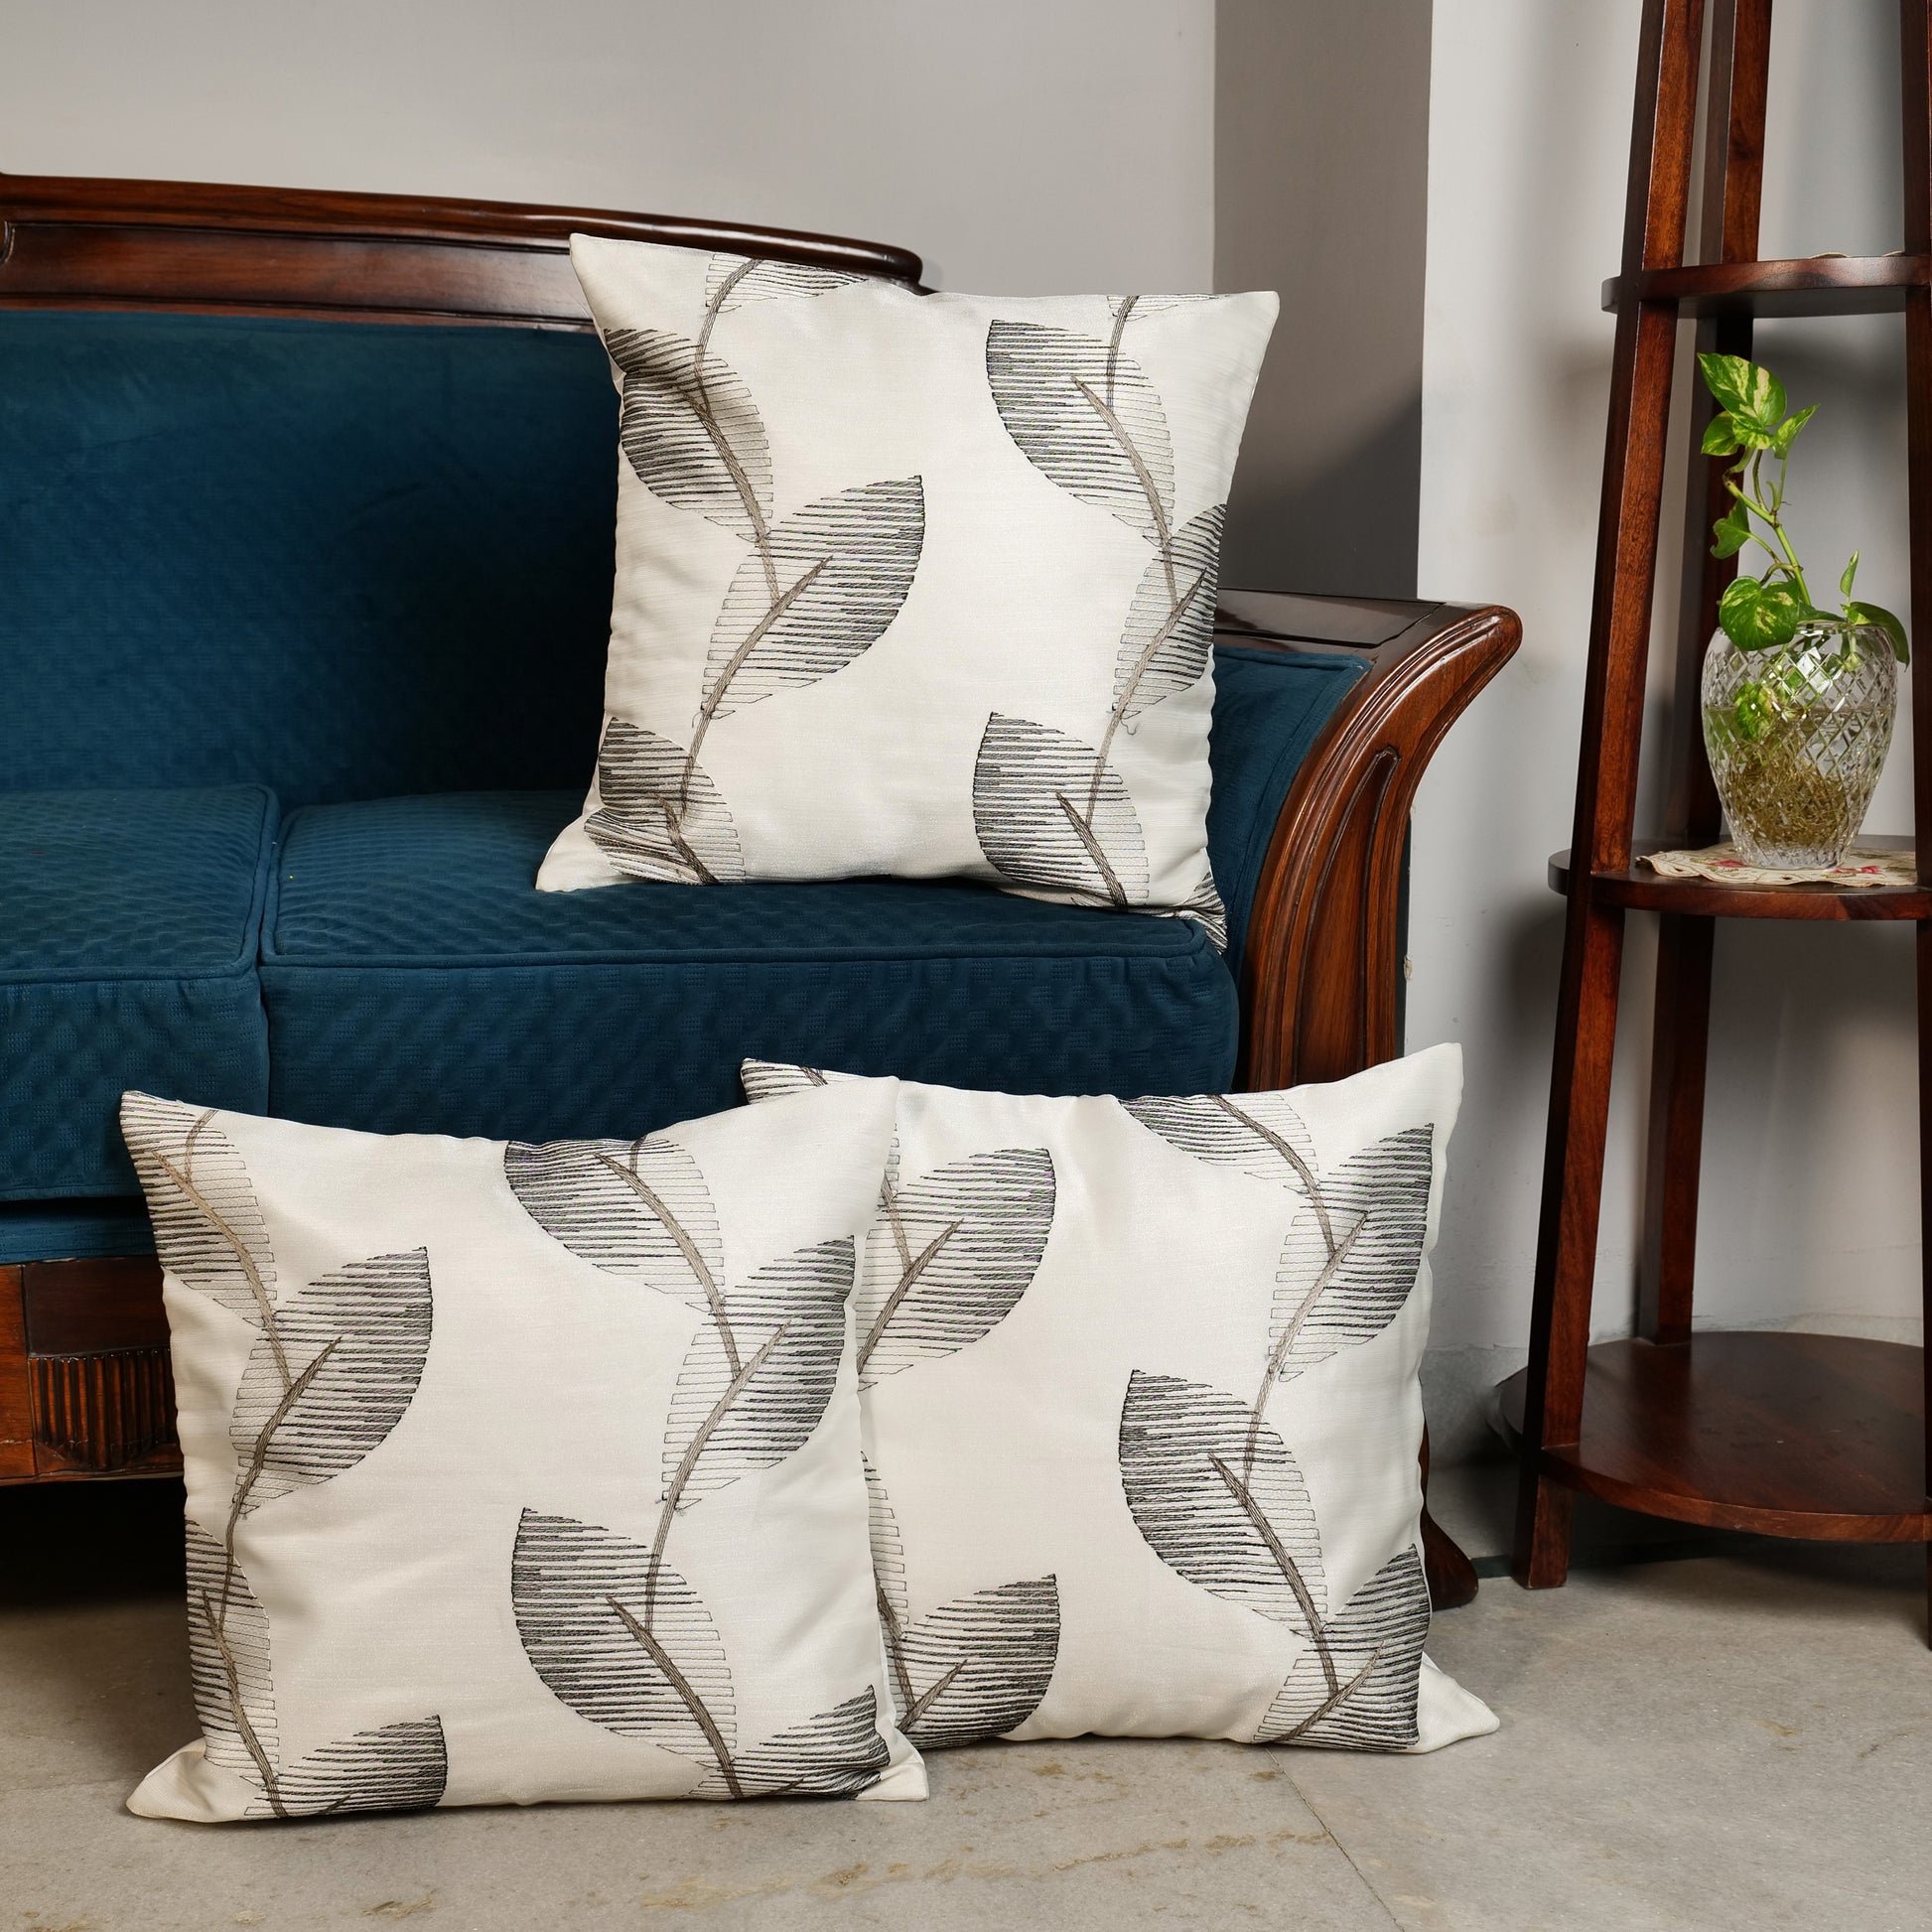 'Black Leaves' White Cushion Covers In Organza Tissue With Thread Work (16 x 16 Inch)